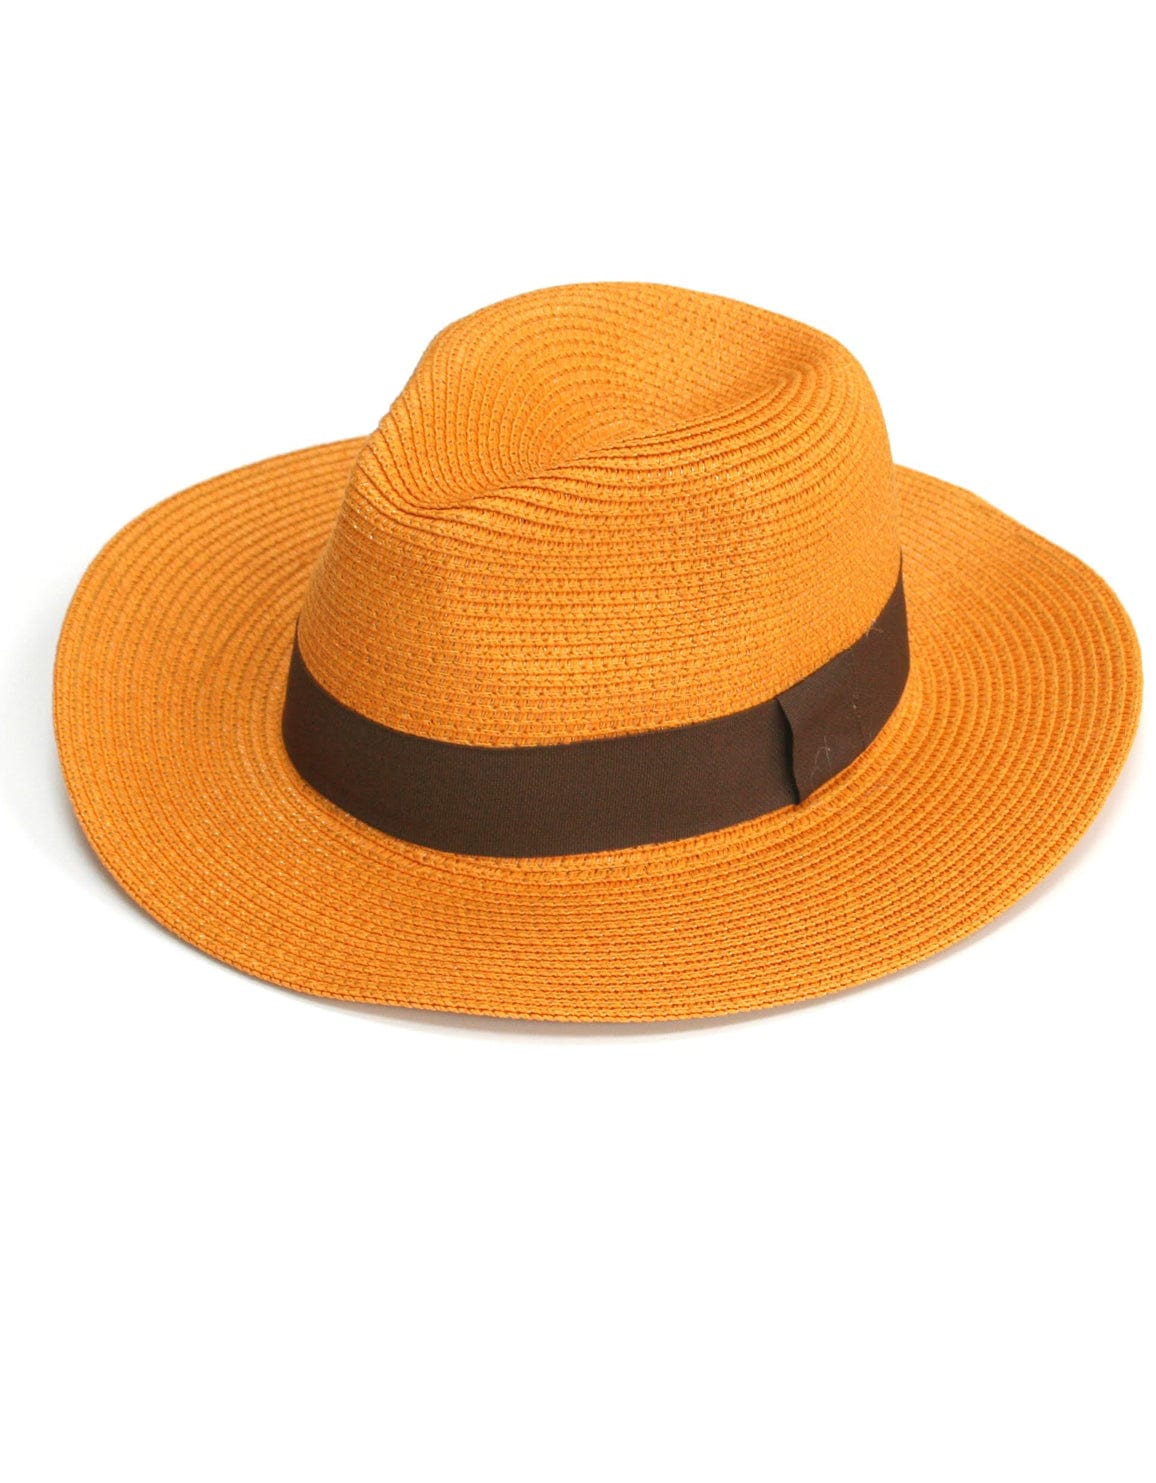 Mustard Yellow foldable Panama hat , Rollable , packable Sun hat